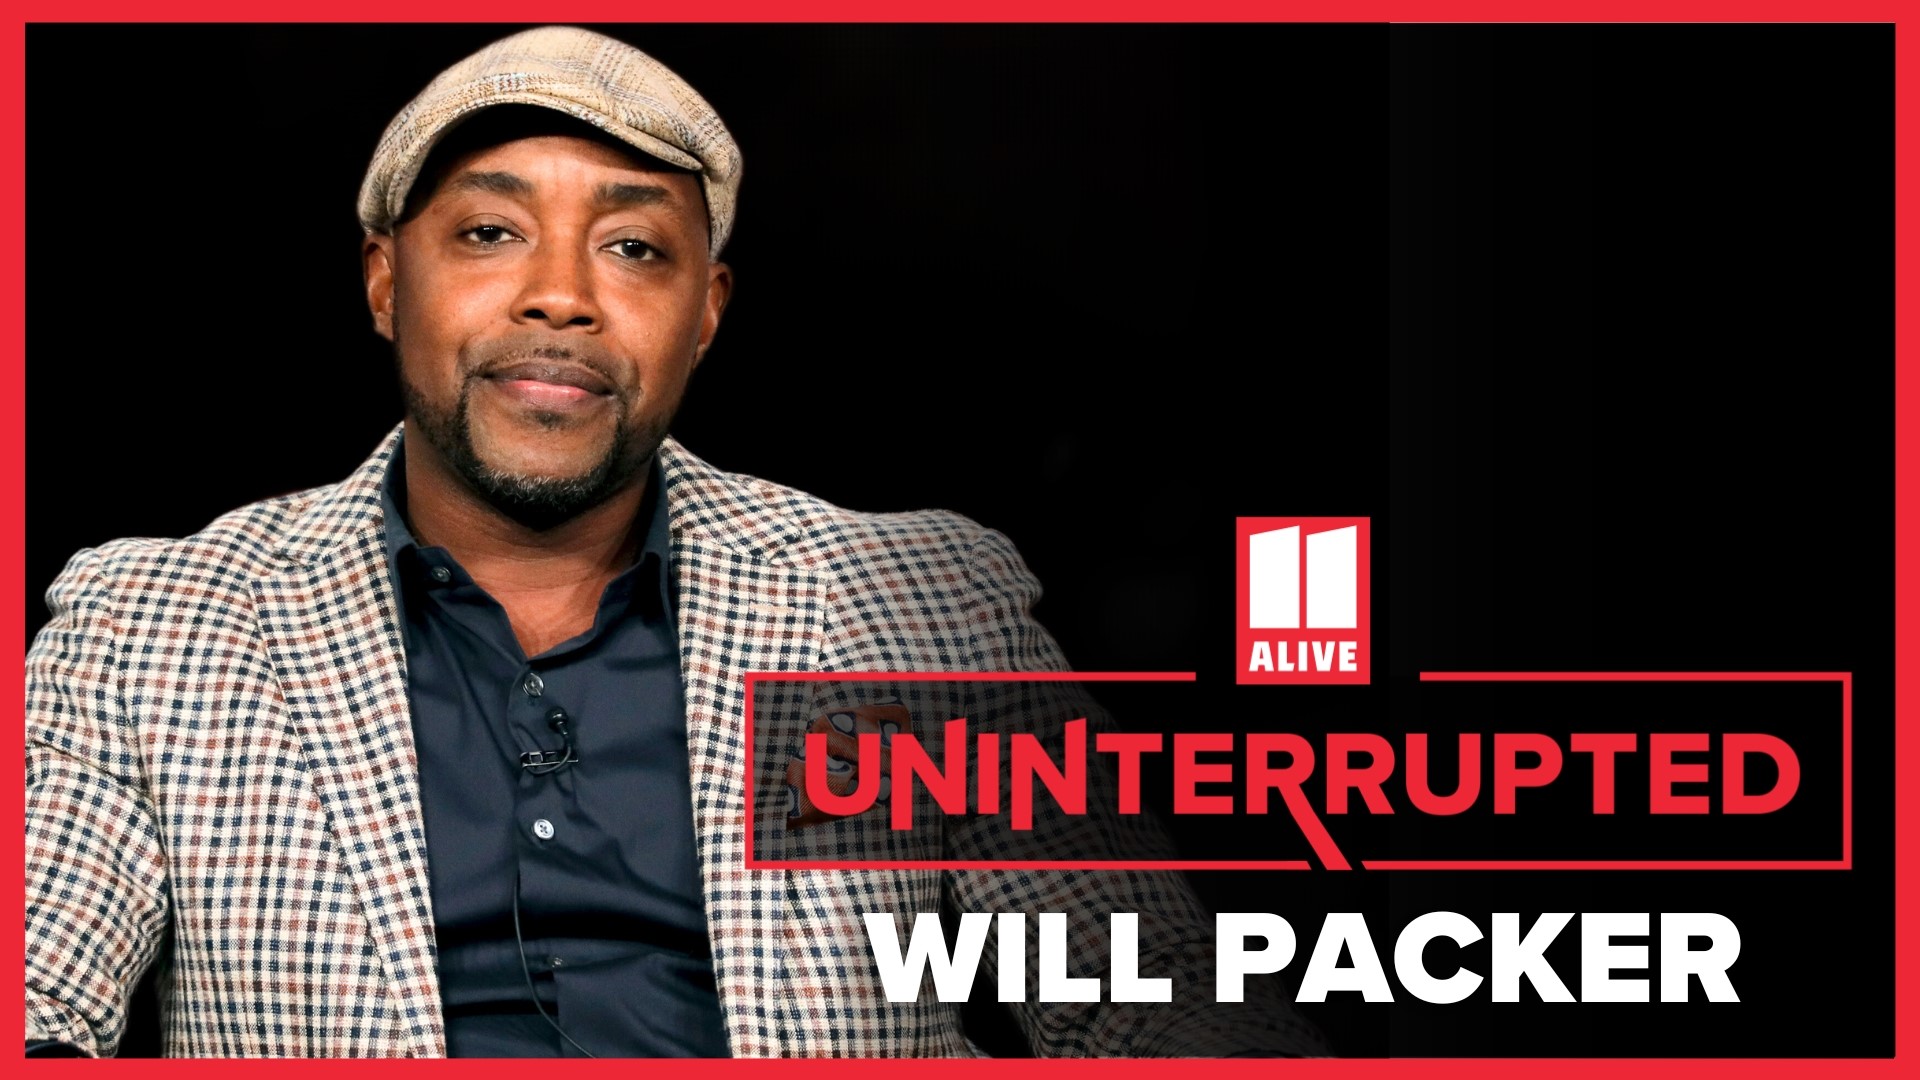 11Alive Uninterrupted brings you in-depth conversations with influential thought leaders in Atlanta. We sat down with award-winning producer Will Packer.